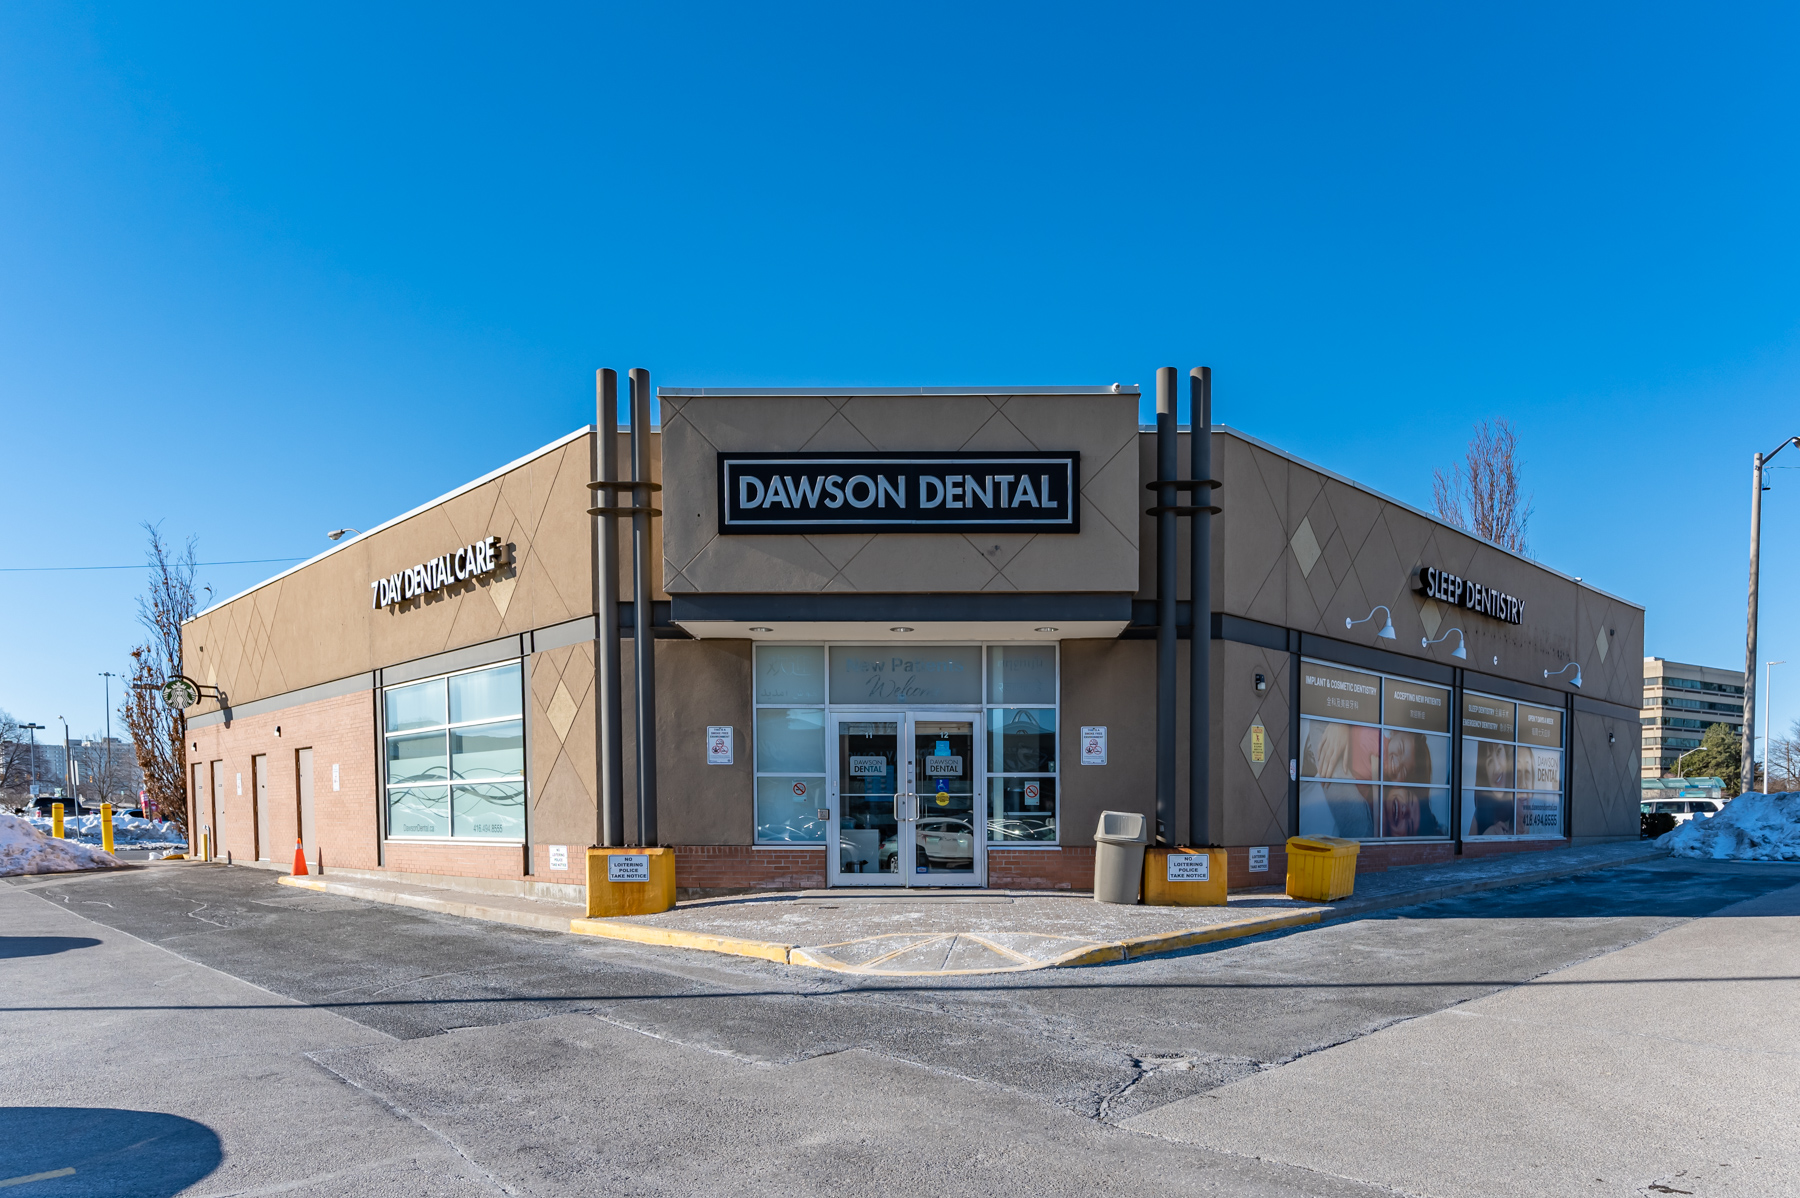 Dawson Dental clinic exterior with no cars or people.